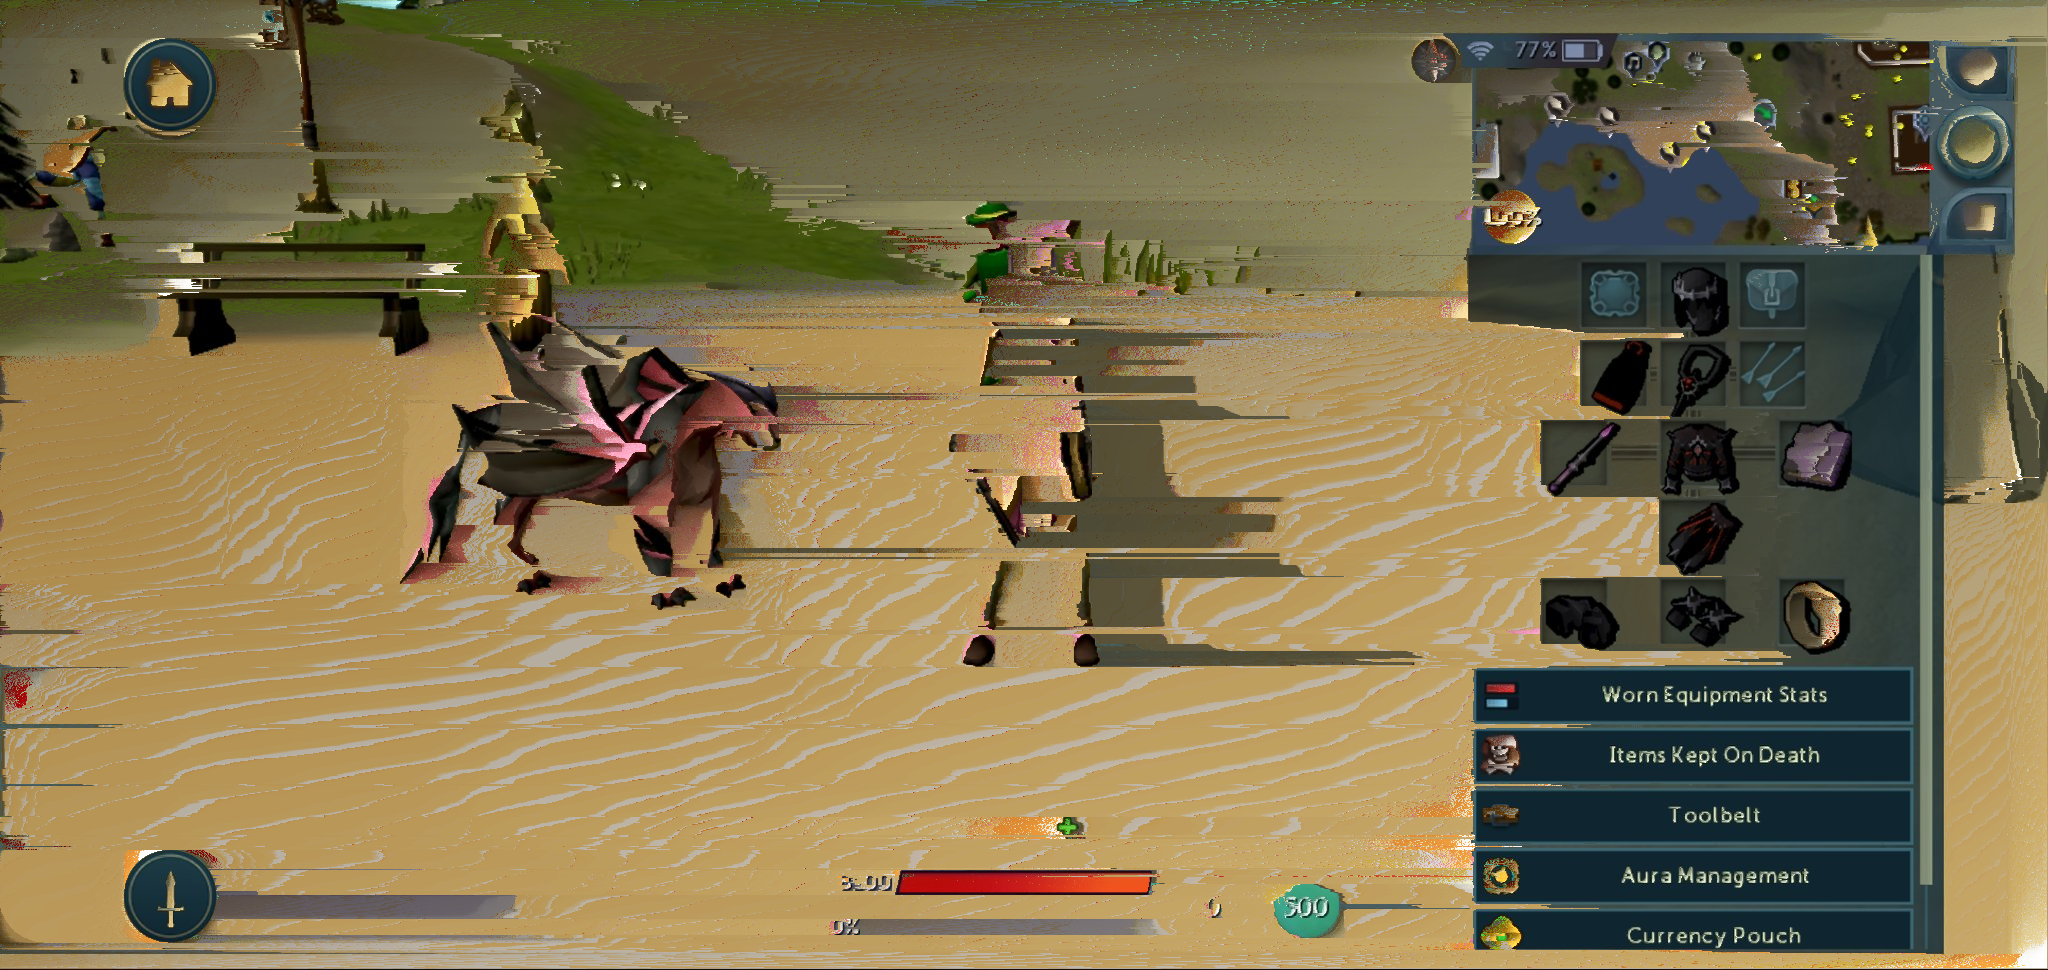 A character crossing the desert is mostly obliterated by a horizontal glitch, but their equipment loadout is still visible.